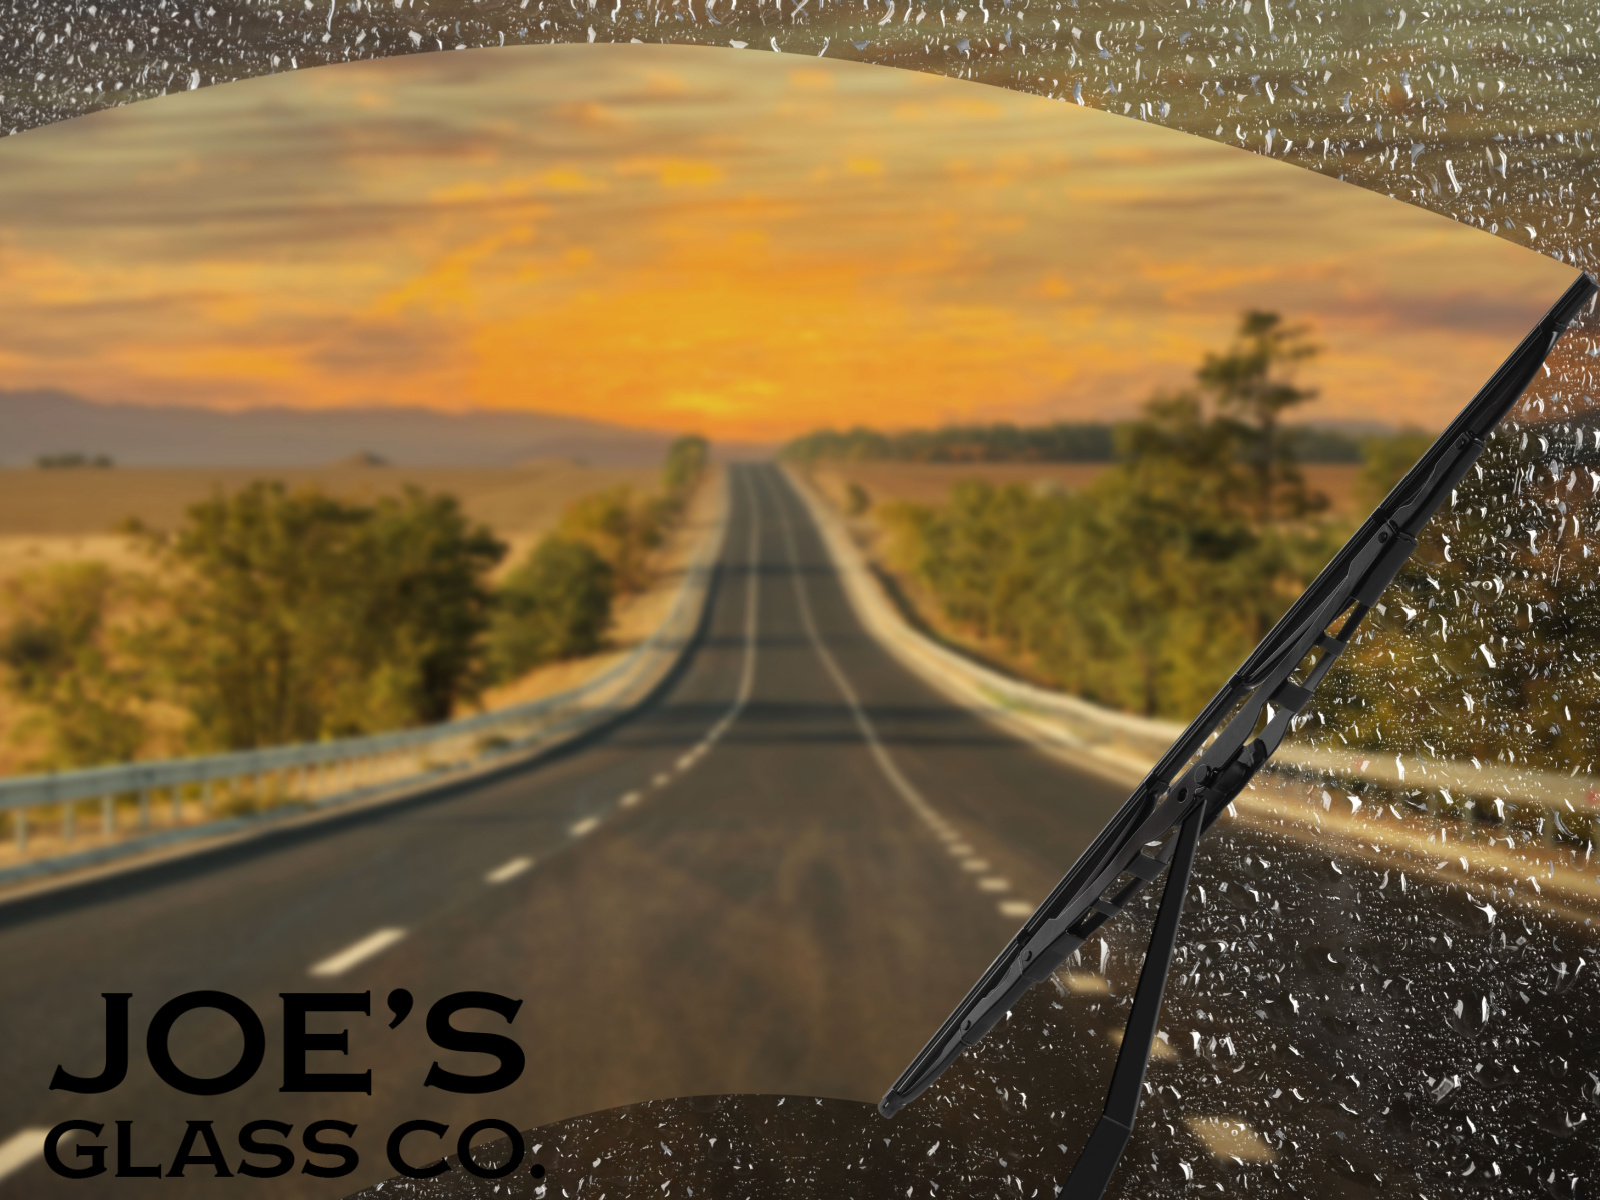 Shattering Expectations: The Art of Windshield Glass Craftsmanship